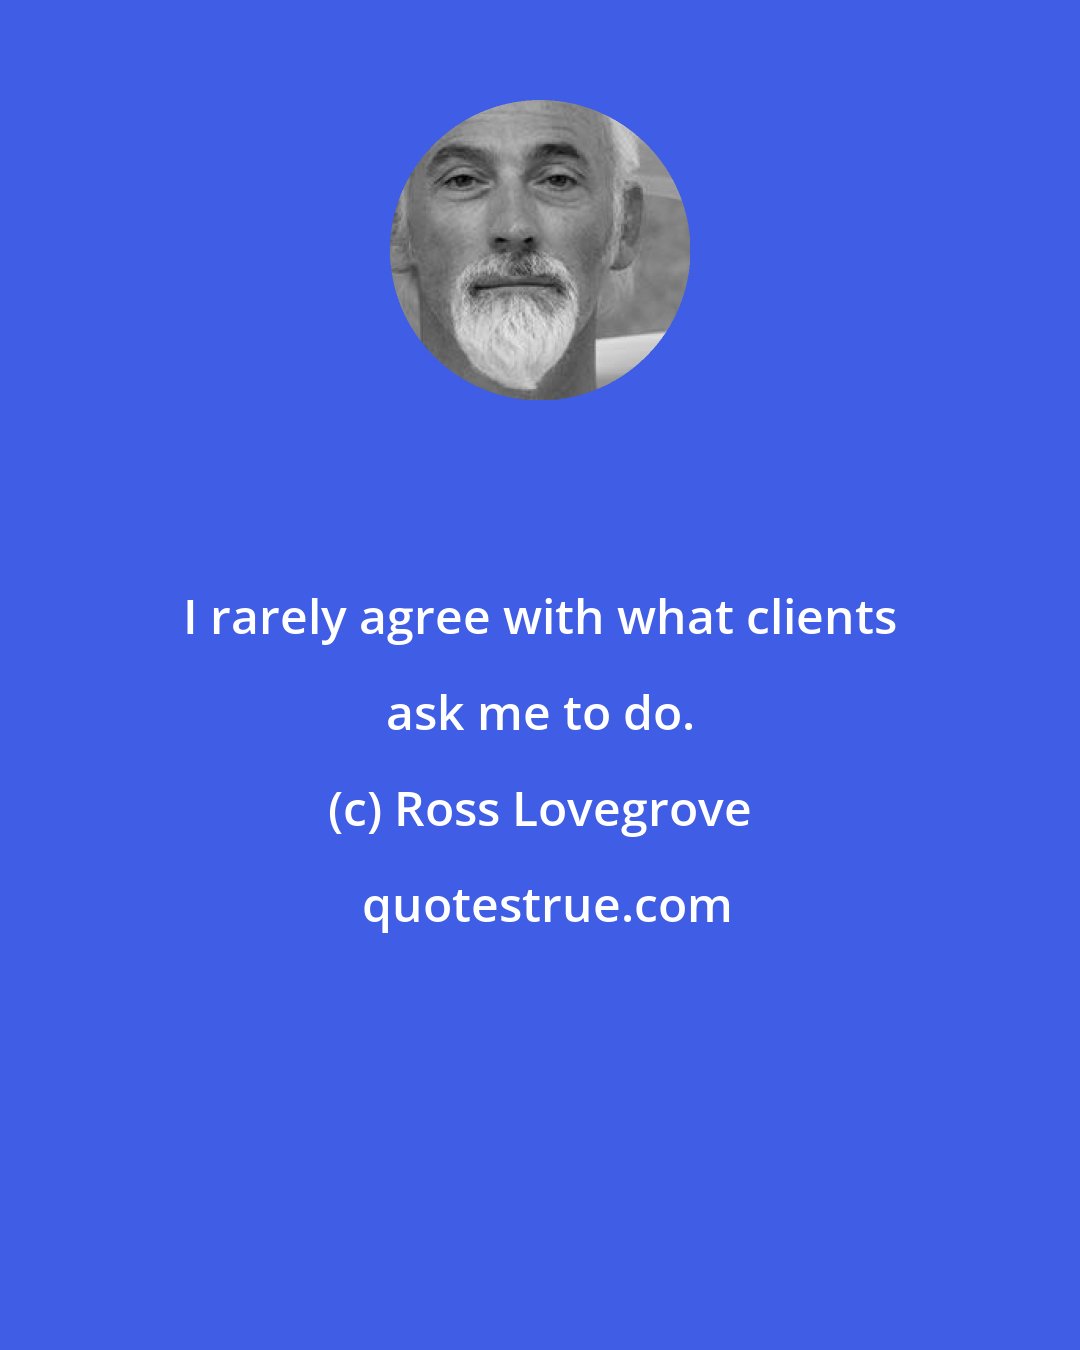 Ross Lovegrove: I rarely agree with what clients ask me to do.